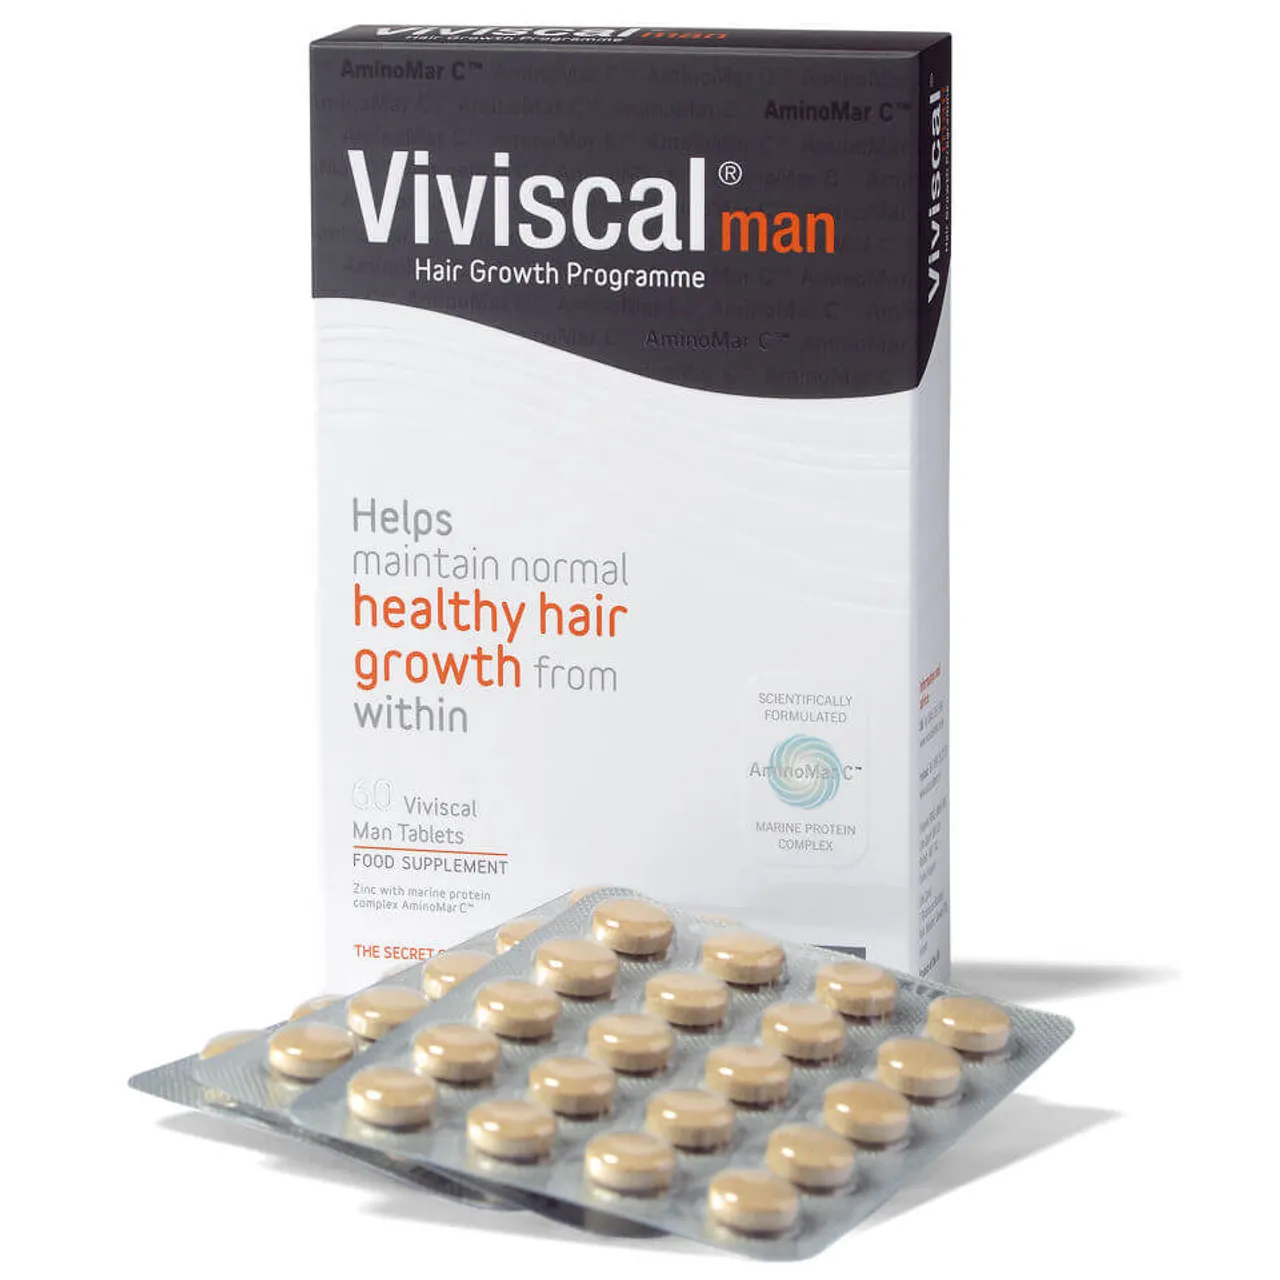 Viviscal Zinc and Flax Seed Hair Supplement Tablets for Men - 60 Tablets (1 Month Supply)